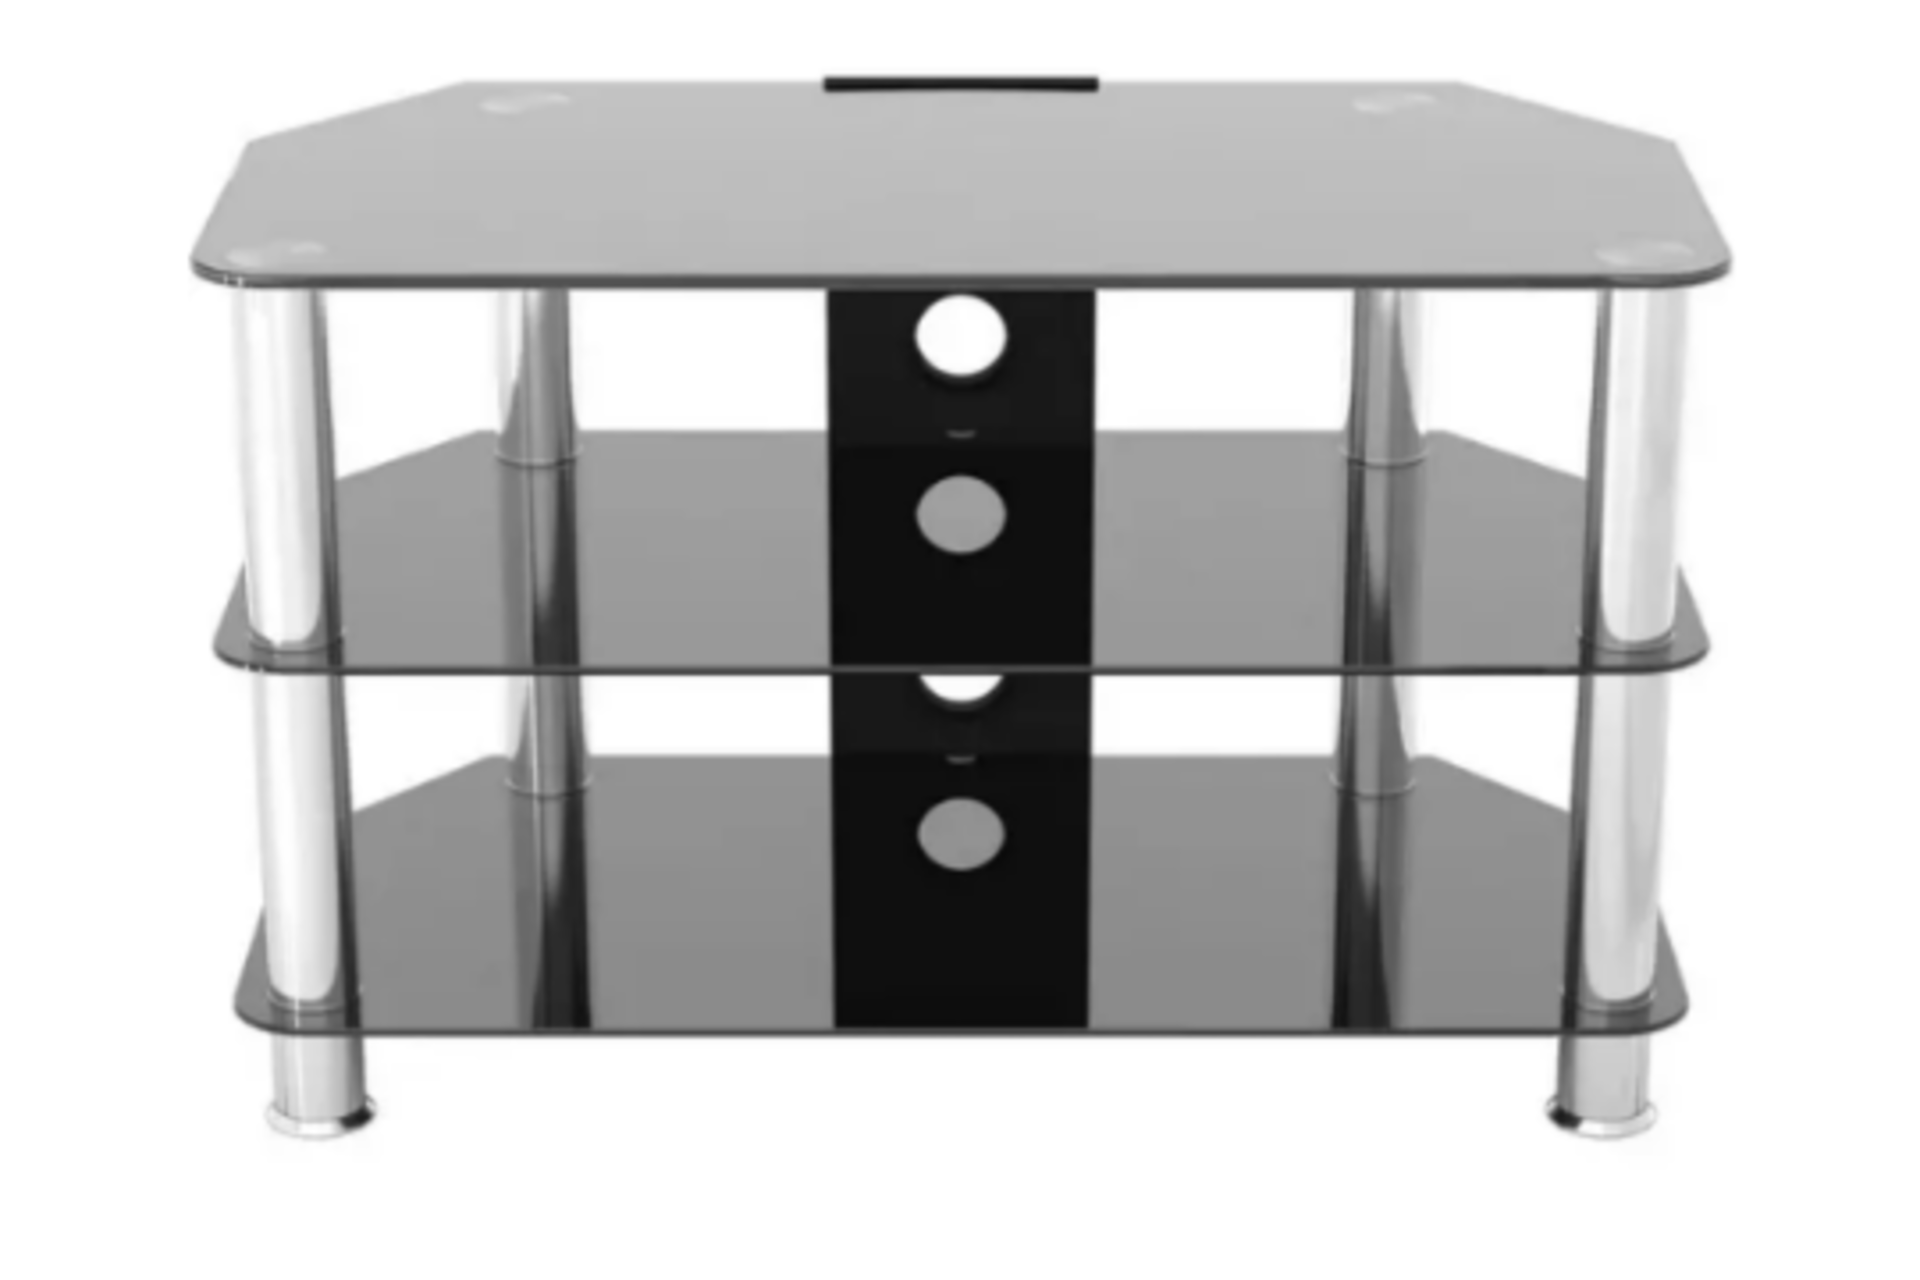 PALLET TO CONTAIN 30 x NEW LIVING GLASS TV STANDS. BLACK TEMPERED GLASS WITH STAINLESS STEEL LEGS. - Image 5 of 5